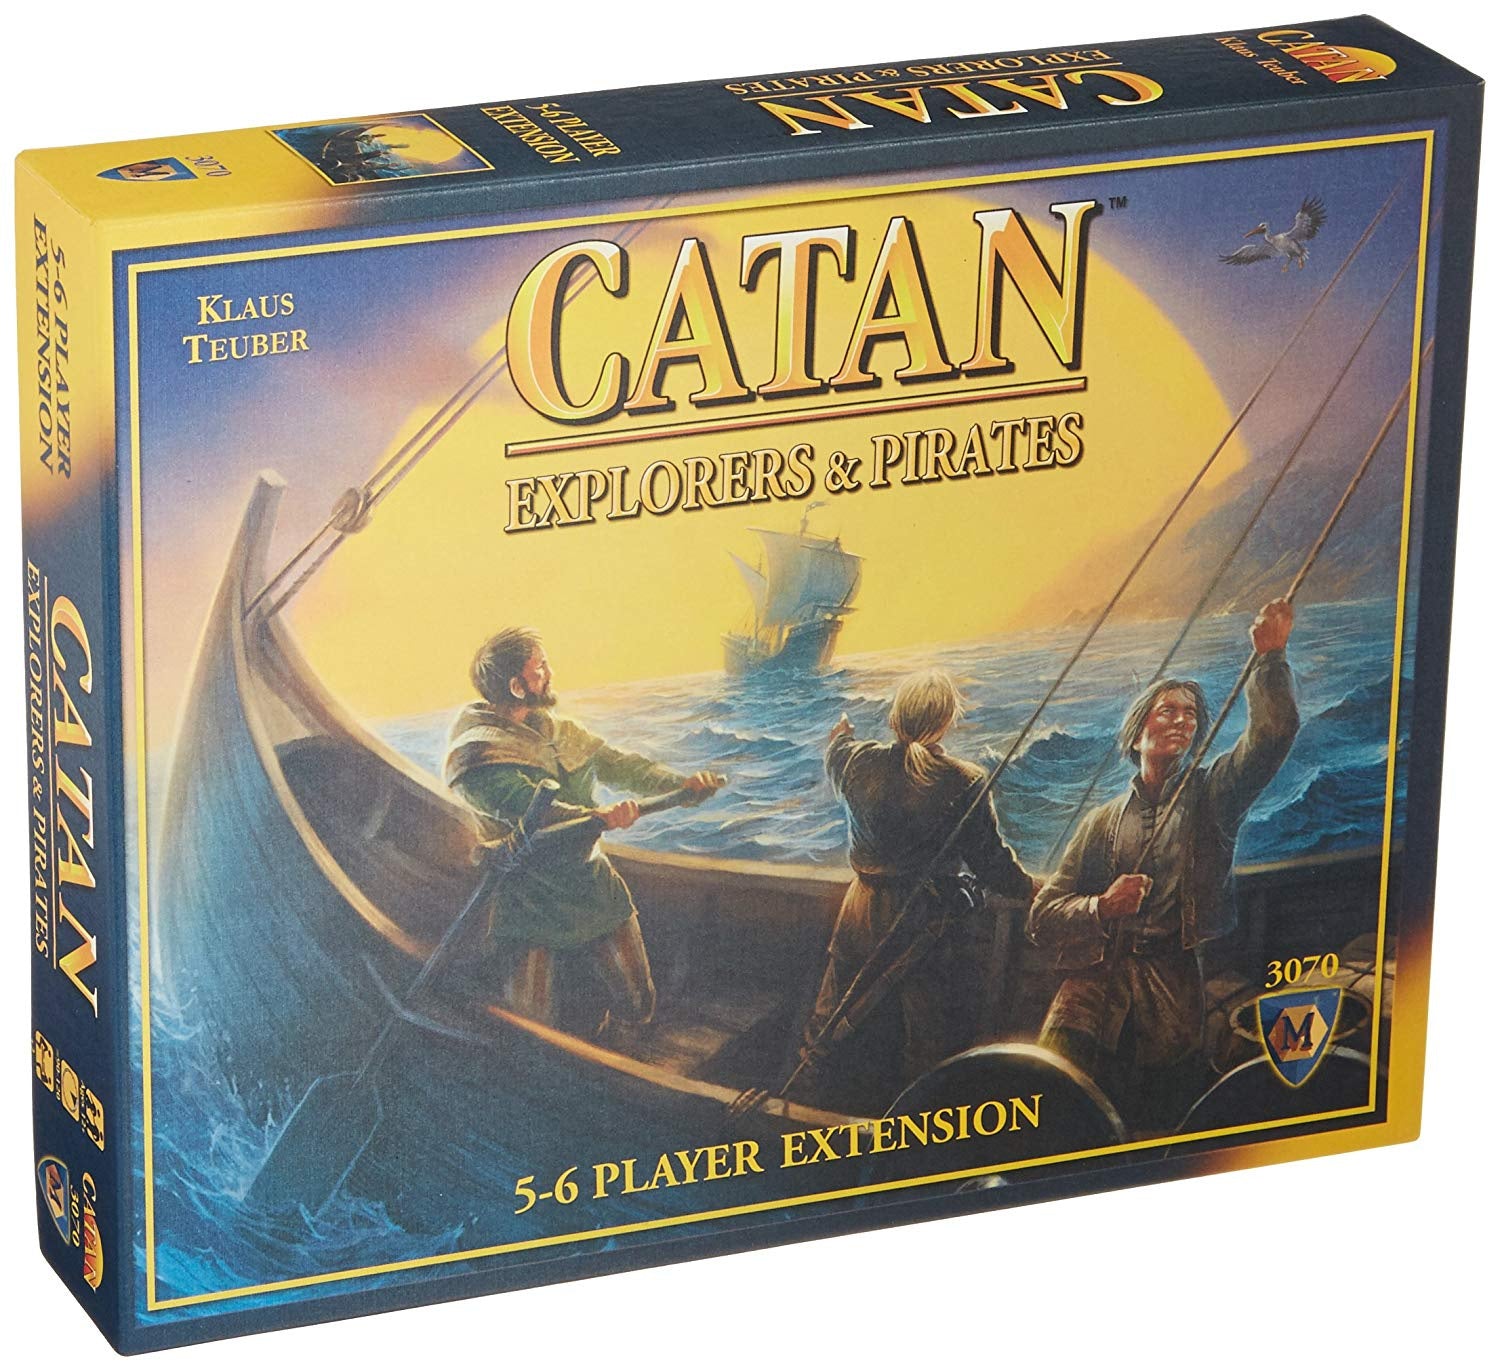 Catan Explorers and Pirates 5-6 Player Extension - Duel Kingdom